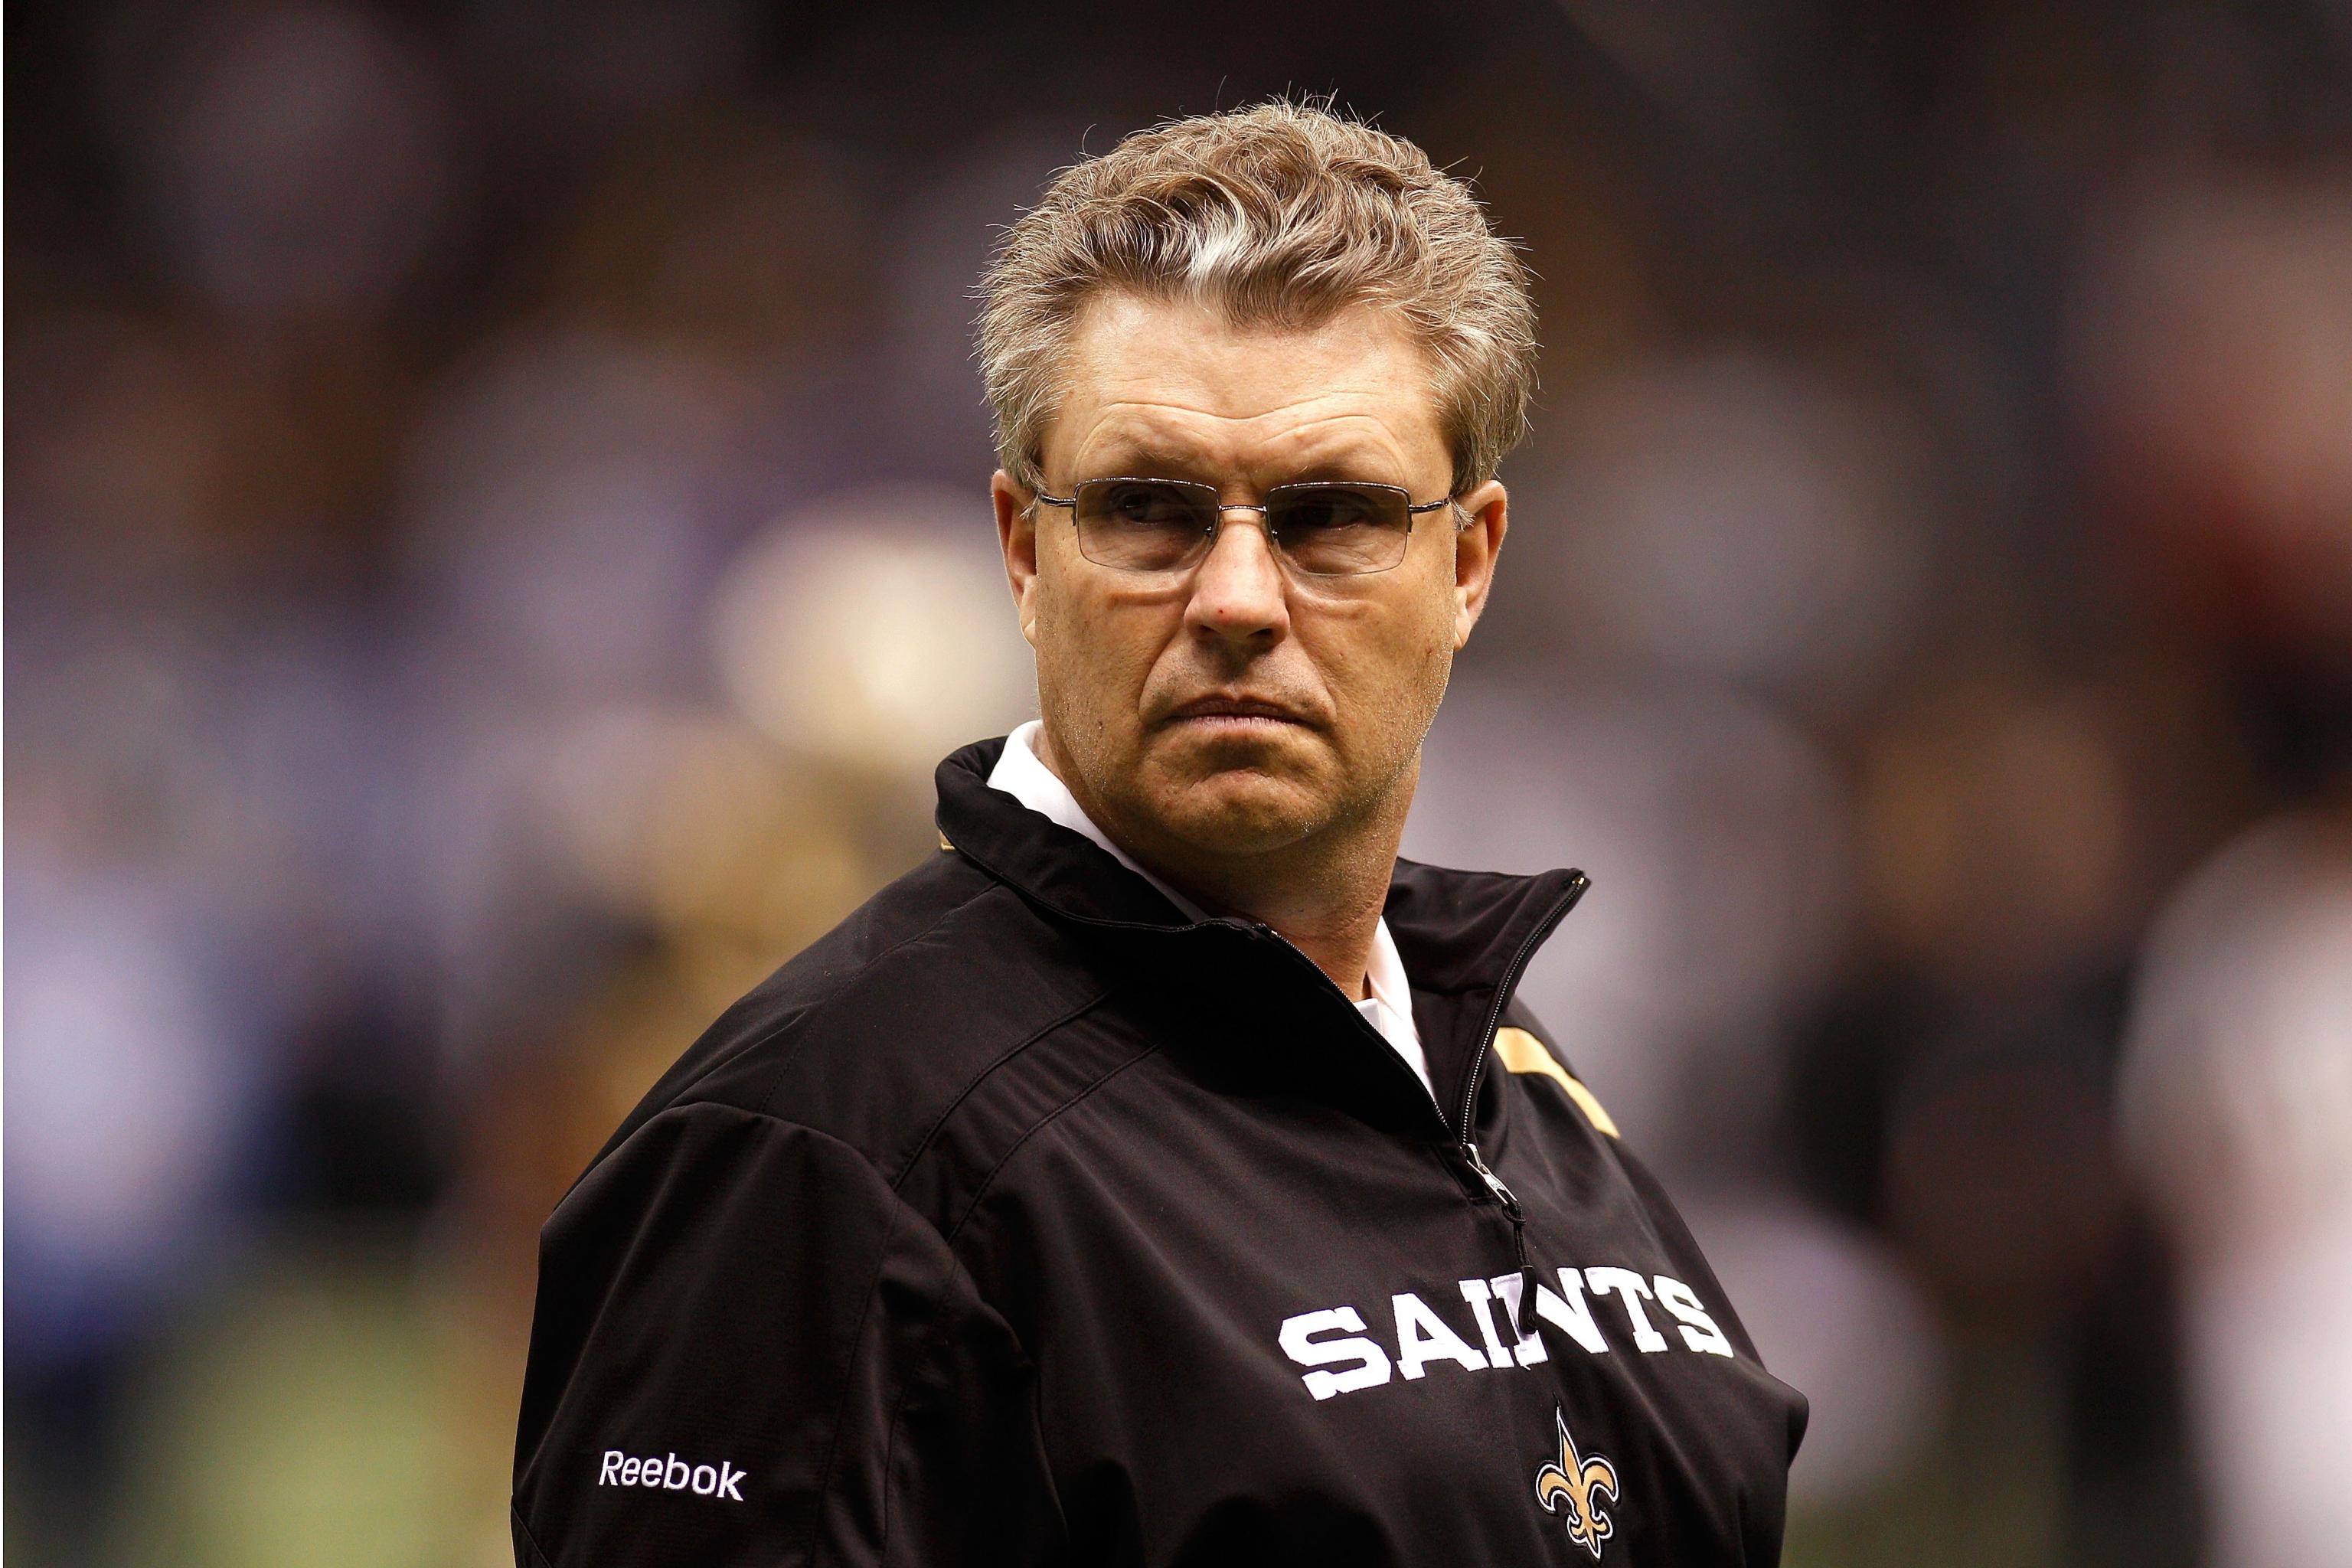 Saints Bounty Stunning Audio Urging Players To Injure Condemns Gregg Williams Bleacher Report Latest News Videos And Highlights